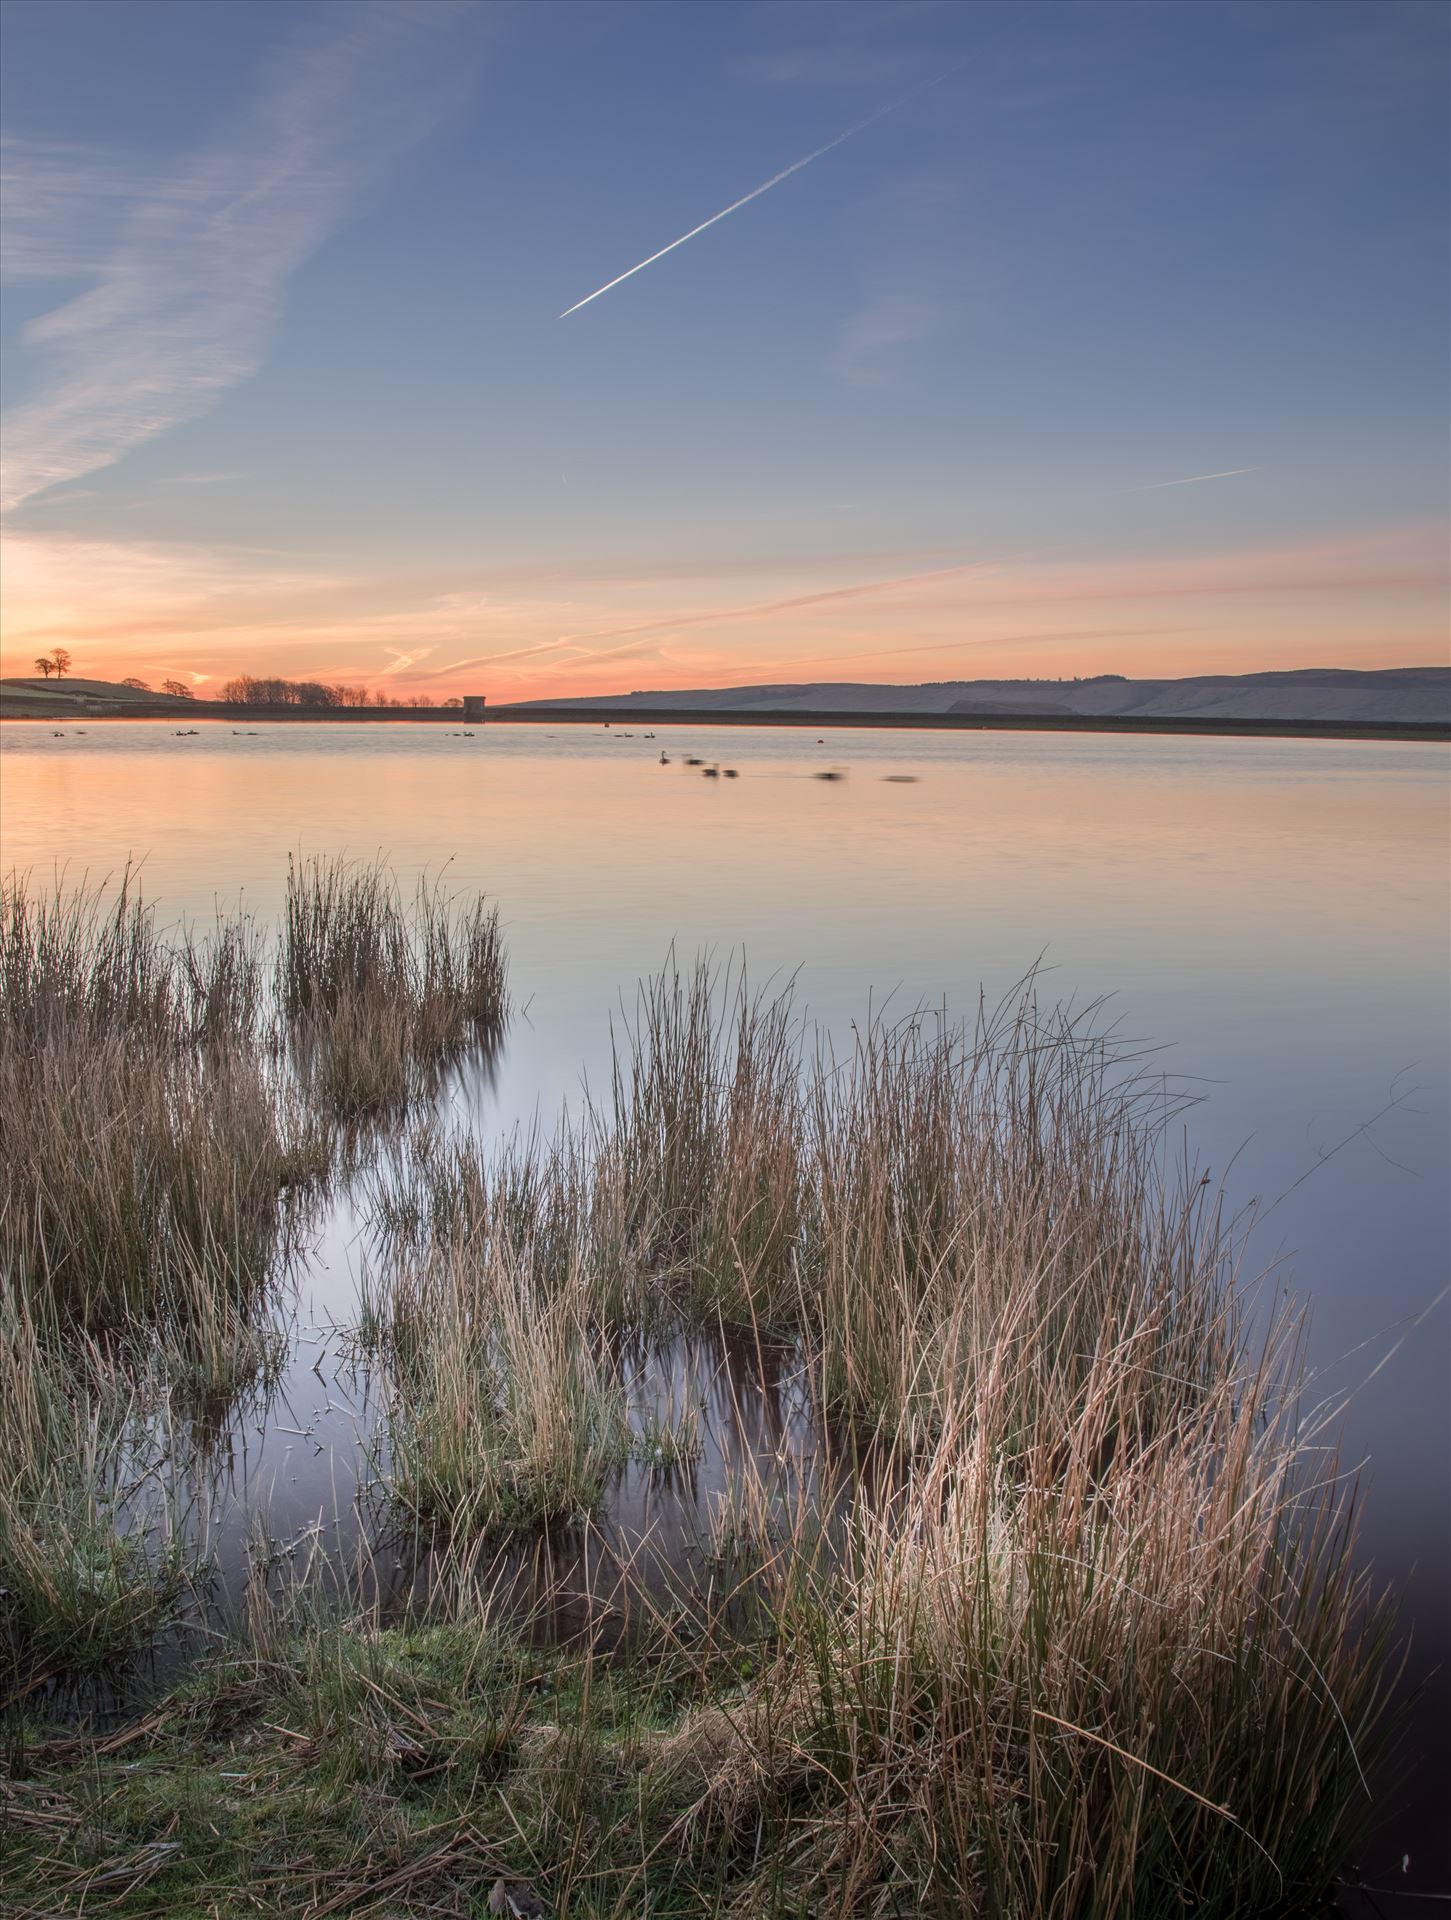 Embsay Reservoir at sunrise - Embsay Reservoir is located above the village of Embsay, near Skipton in the Yorkshire Dales in North Yorkshire. by philreay